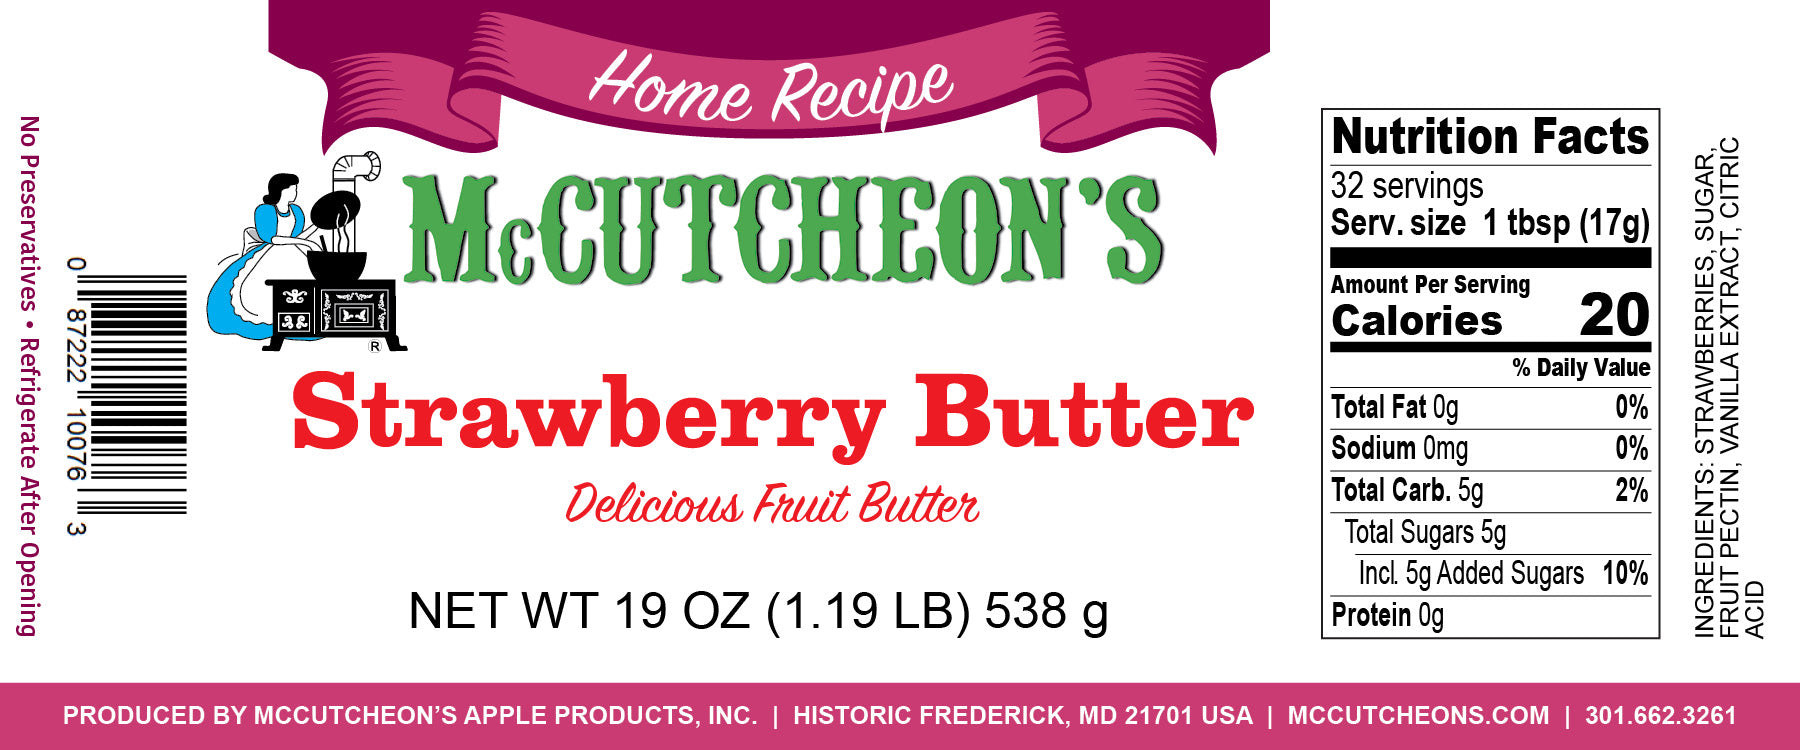 nutritional label for McCutcheon's Strawberry Butter